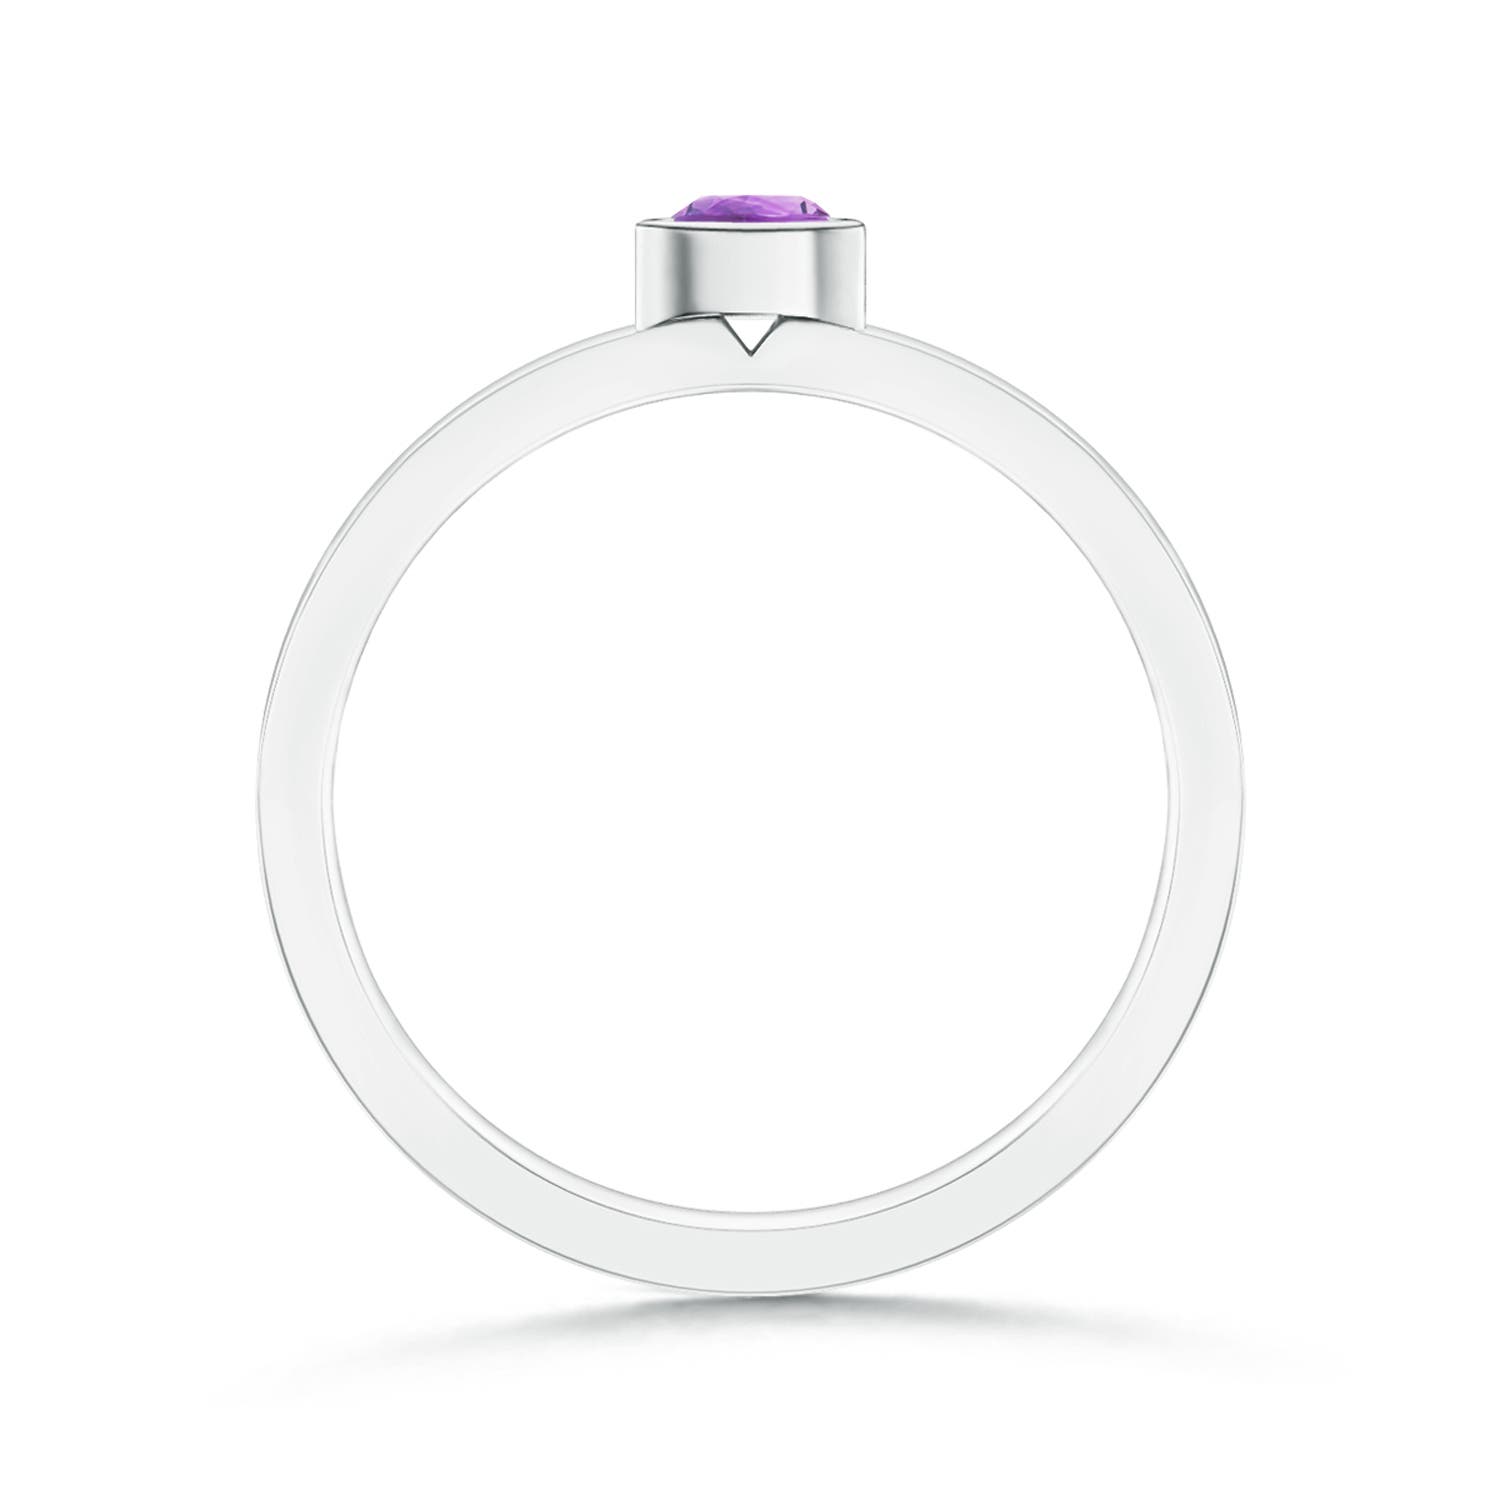 A - Amethyst / 0.16 CT / 14 KT White Gold